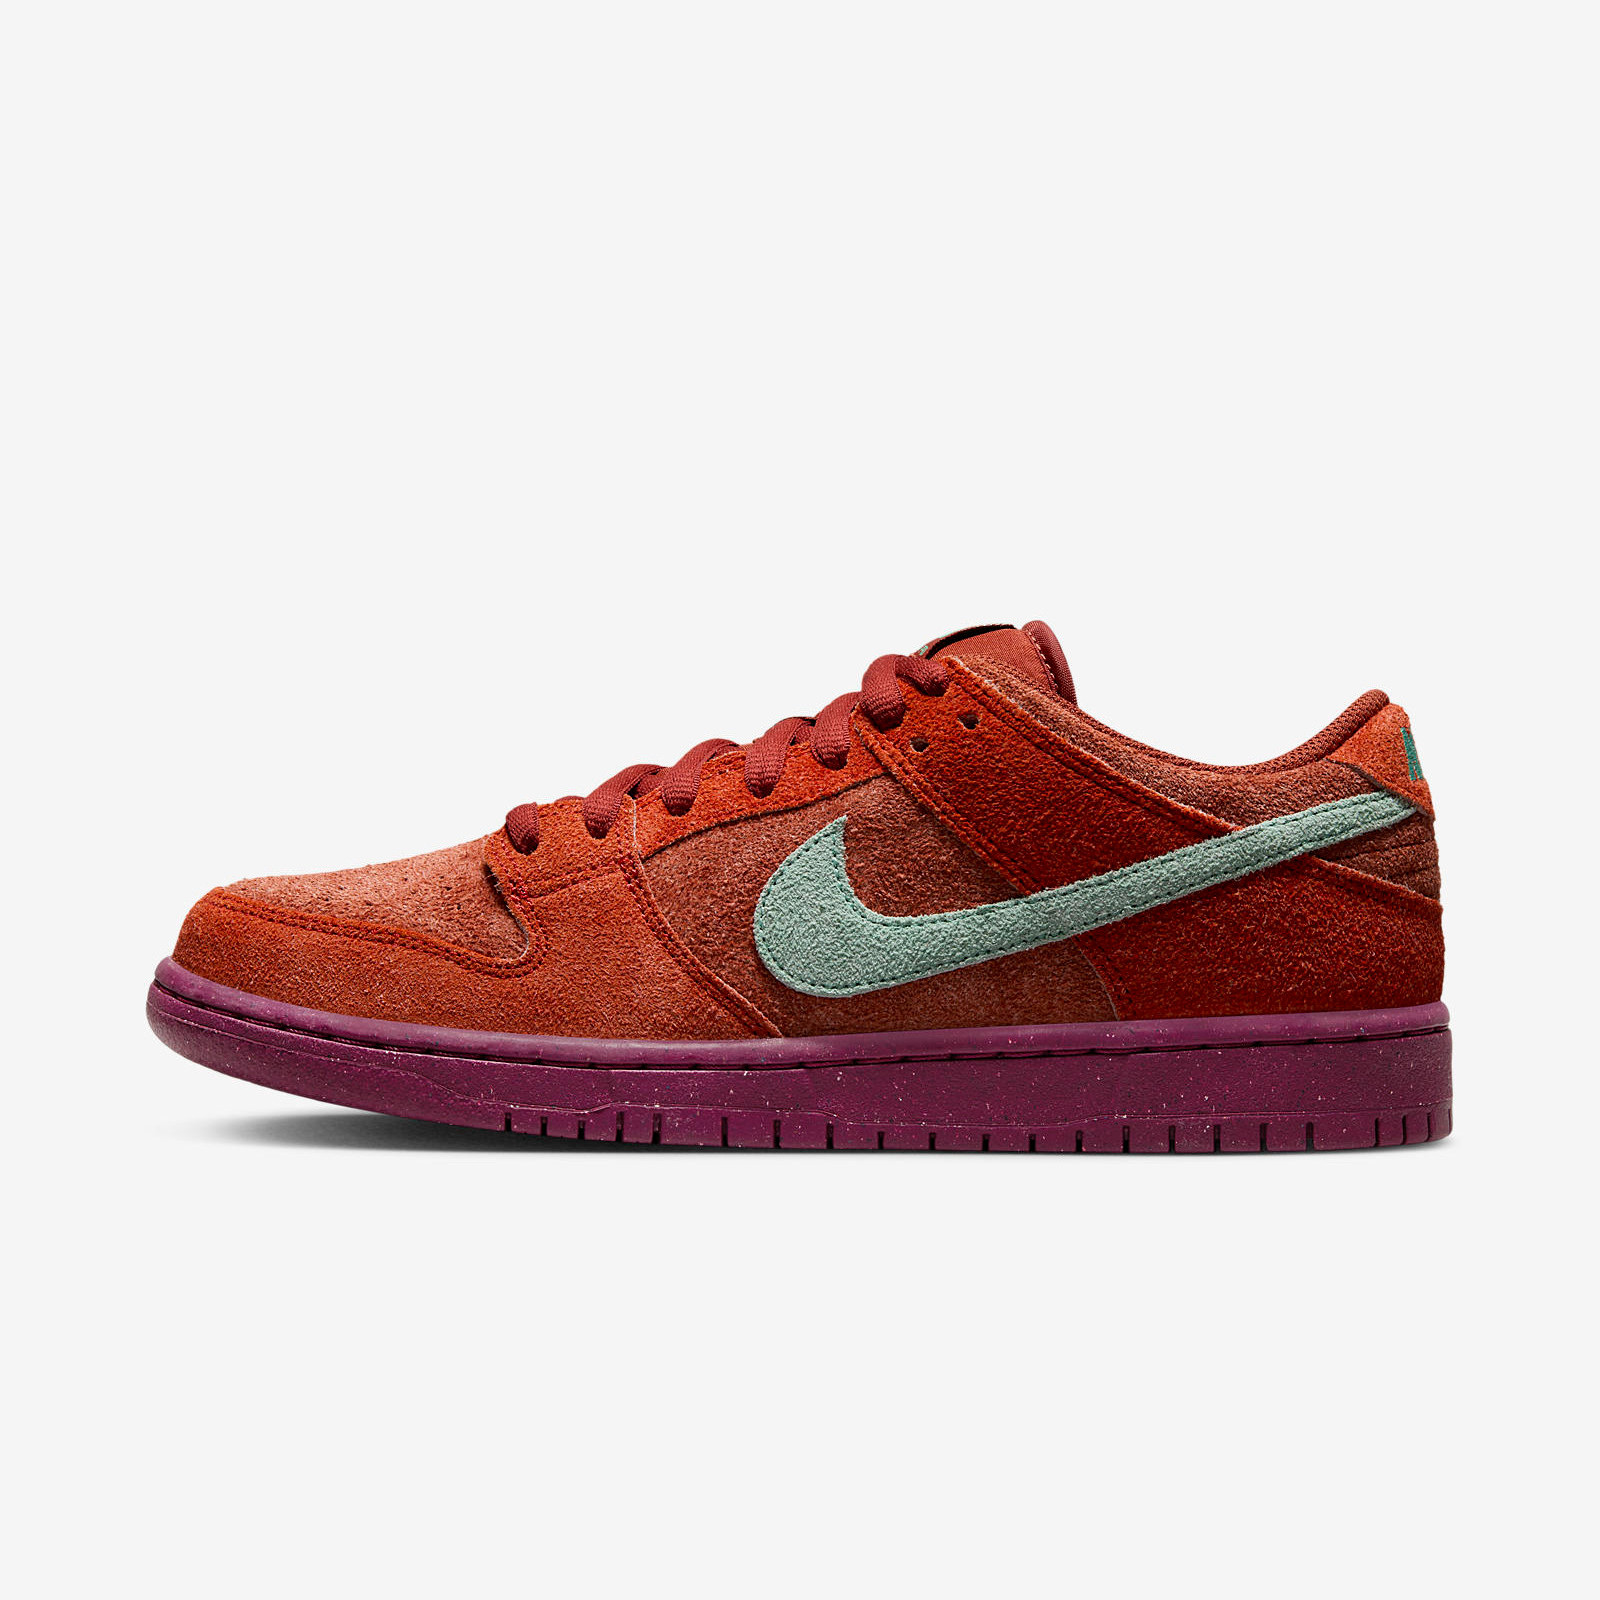 Nike SB Dunk Low Pro
Mystic Red / Rosewood